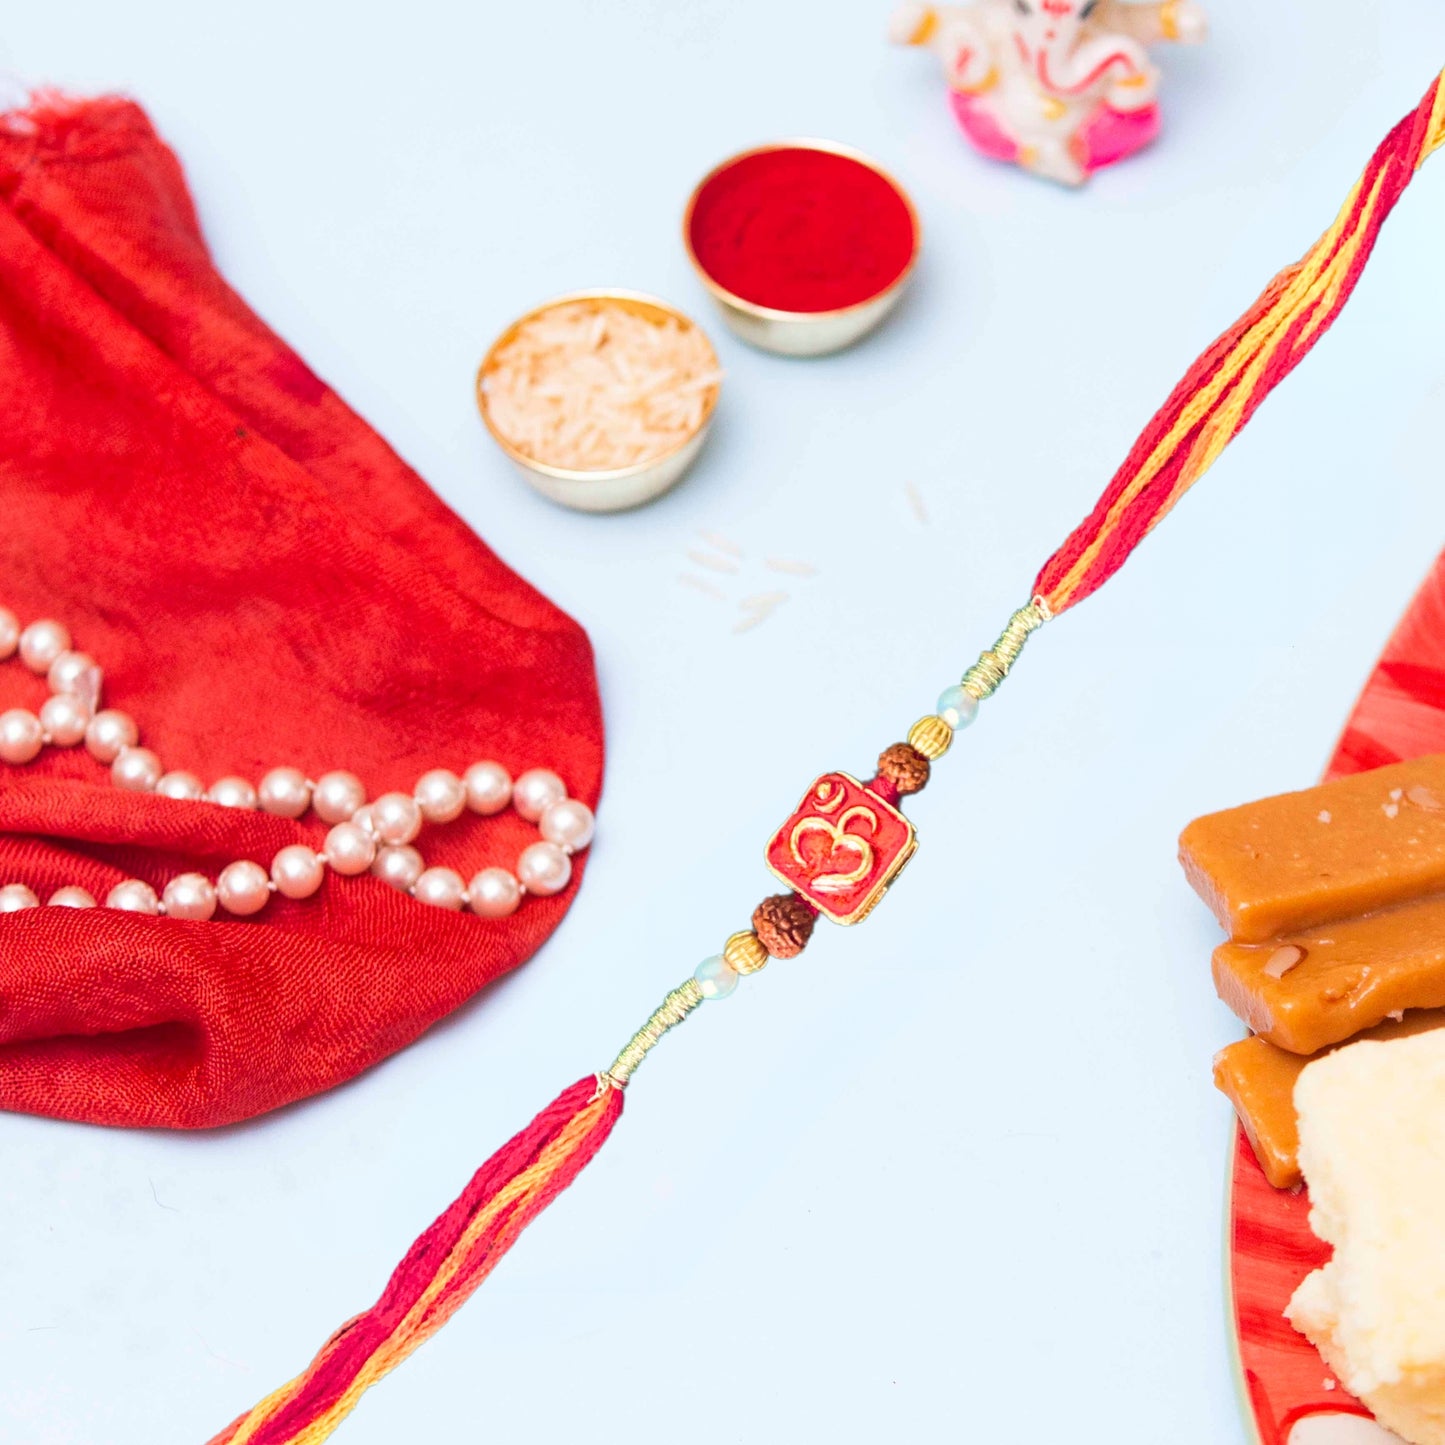 om rakhi with beads, showcasing a red and yellow thread band adorned with golden and rudraksha beads, features a red square centerpiece with a gold "Om" symbol, displayed against a pastel blue background